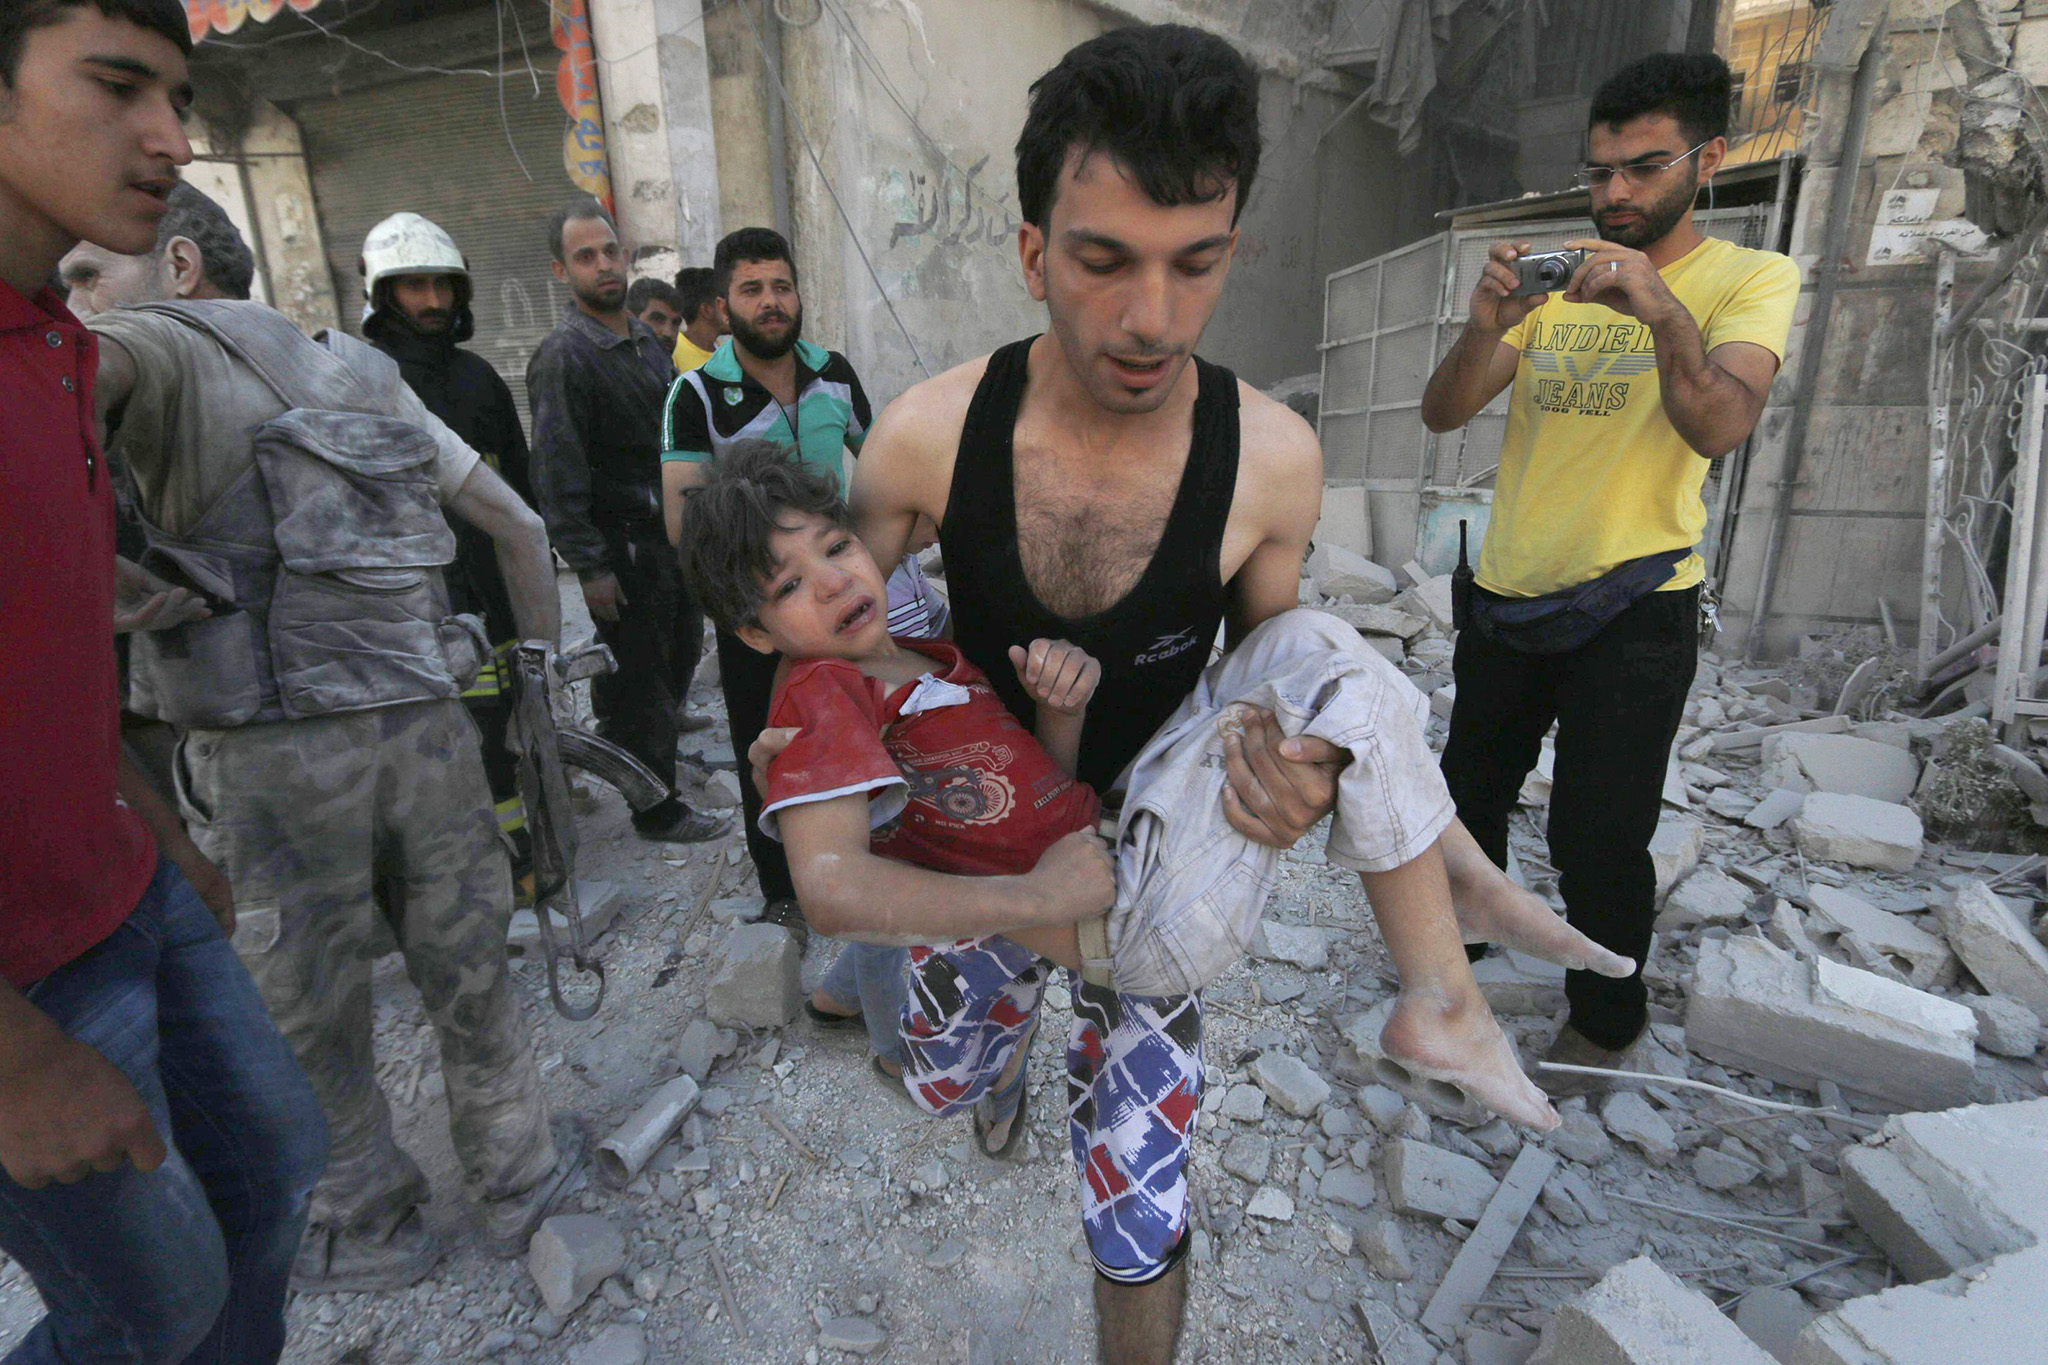 Hosam Katan/Reuters A man carries an injured child after what activists said were barrel bombs were dropped by forces of Syria’s President Bashar Al-Assad in Aleppo’s al-Saliheen district, on Friday. MPC Journal, Hakim Khatib